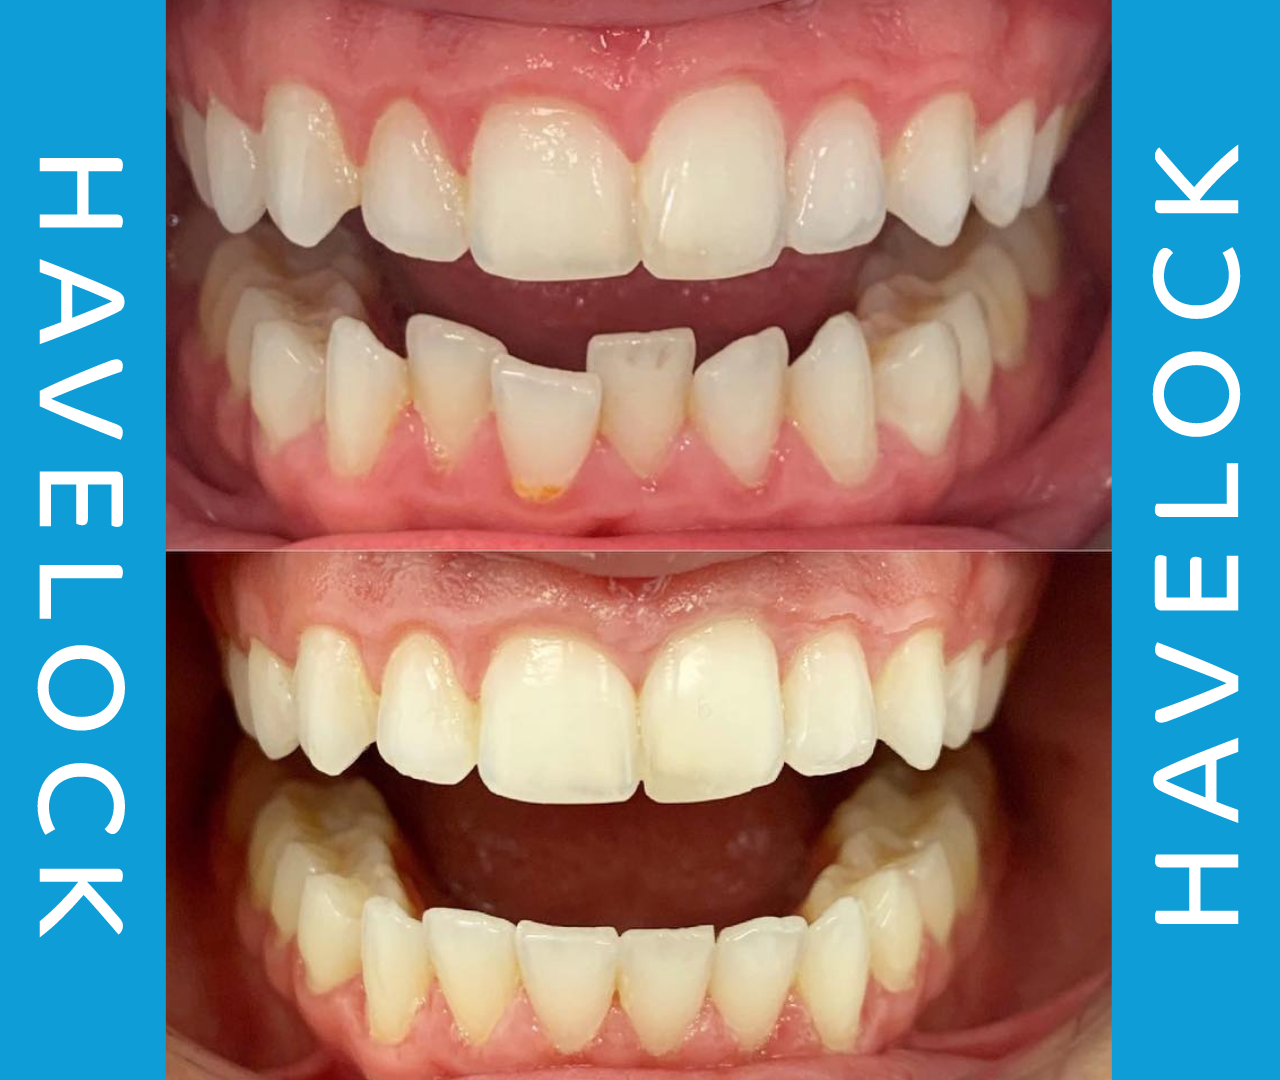 Invisalign Teeth Straightening Dental Treatment Whitby Scarborough North Yorkshire Havelock Dental Practice